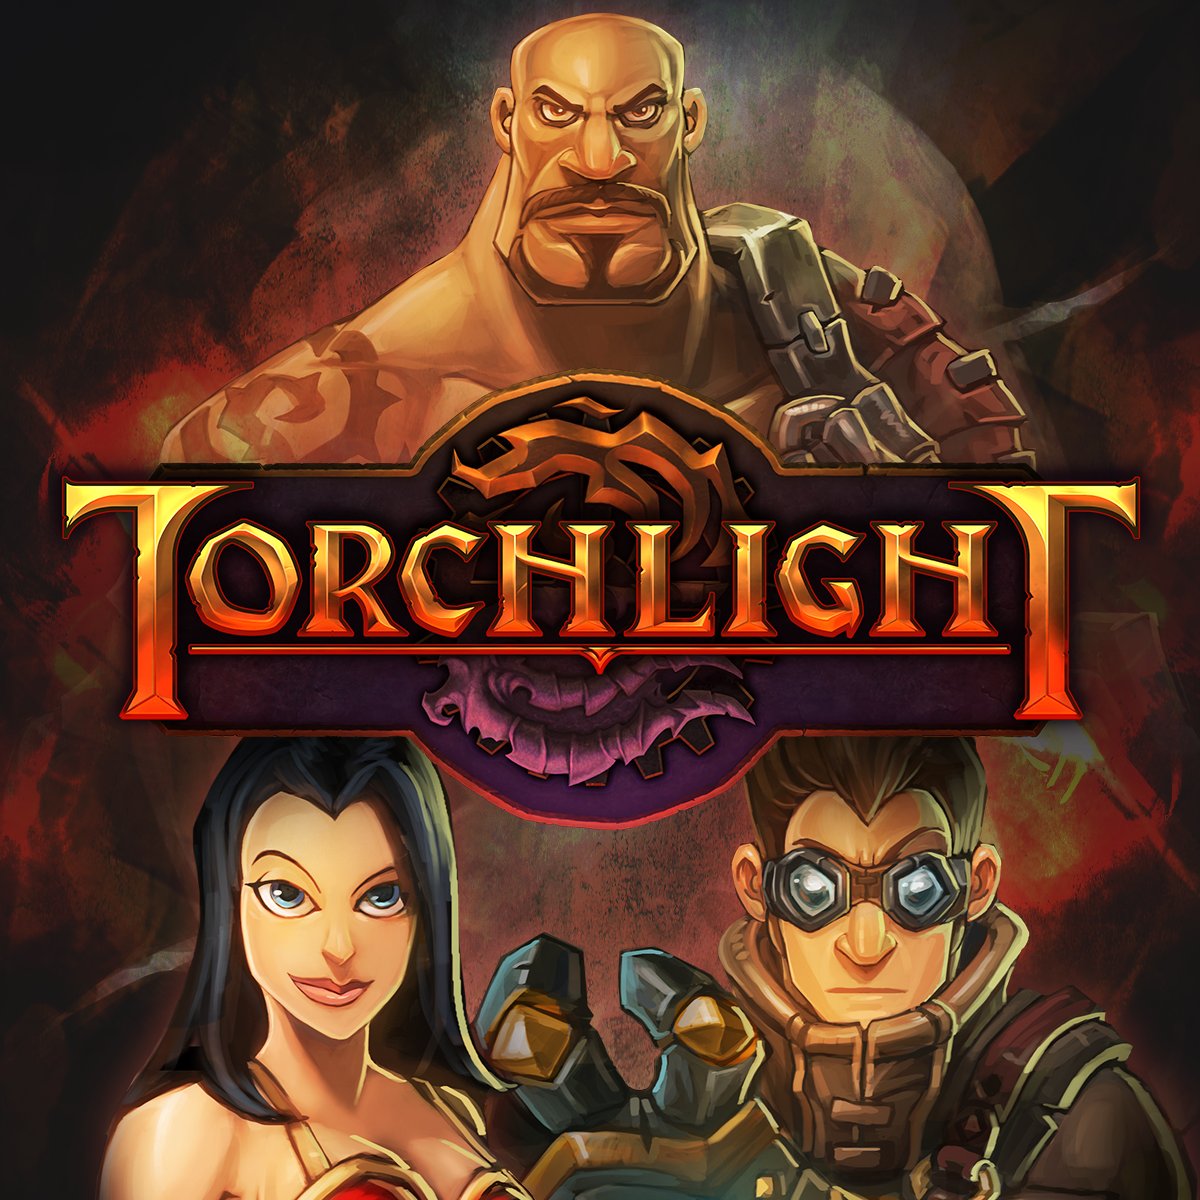 Fahrenheit Mona Lisa Versnipperd Play Torchlight on Twitter: "The Torchlight franchise turns ten and we want  to celebrate ten years of Ember hunting with our fans! For a limited time,  pick up Torchlight I and Torchlight